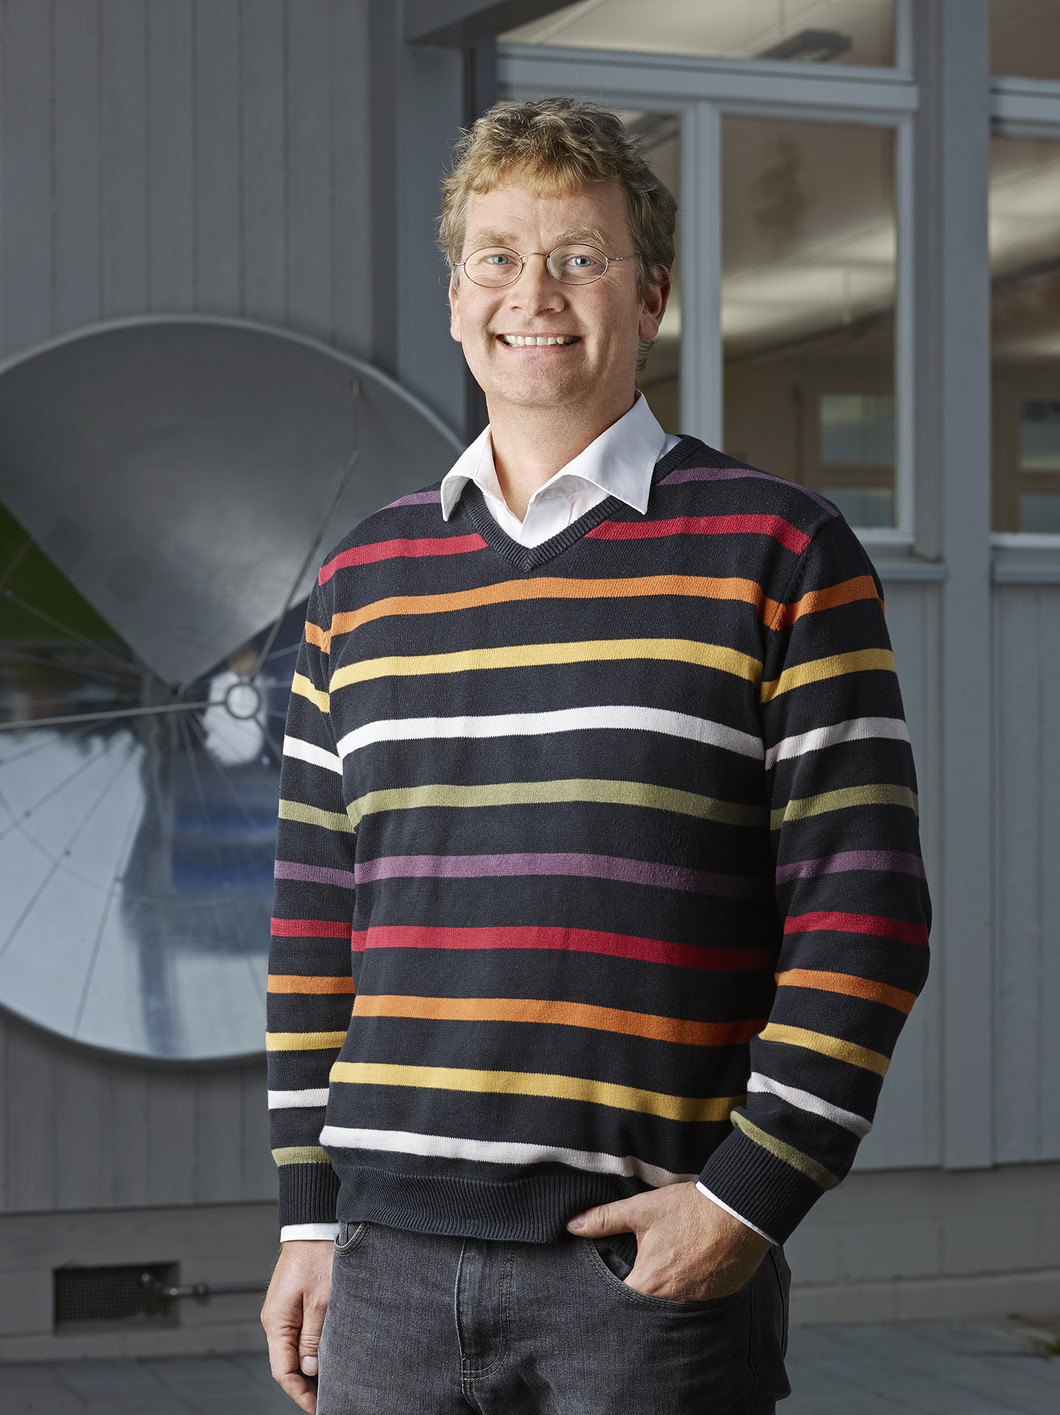 Beat Henrich, Head of the PSI lab school iLab, in front of a parabolic dish, which is used to demonstrate sound transmission over large distances. (Photo: Scanderbeg Sauer Photography)